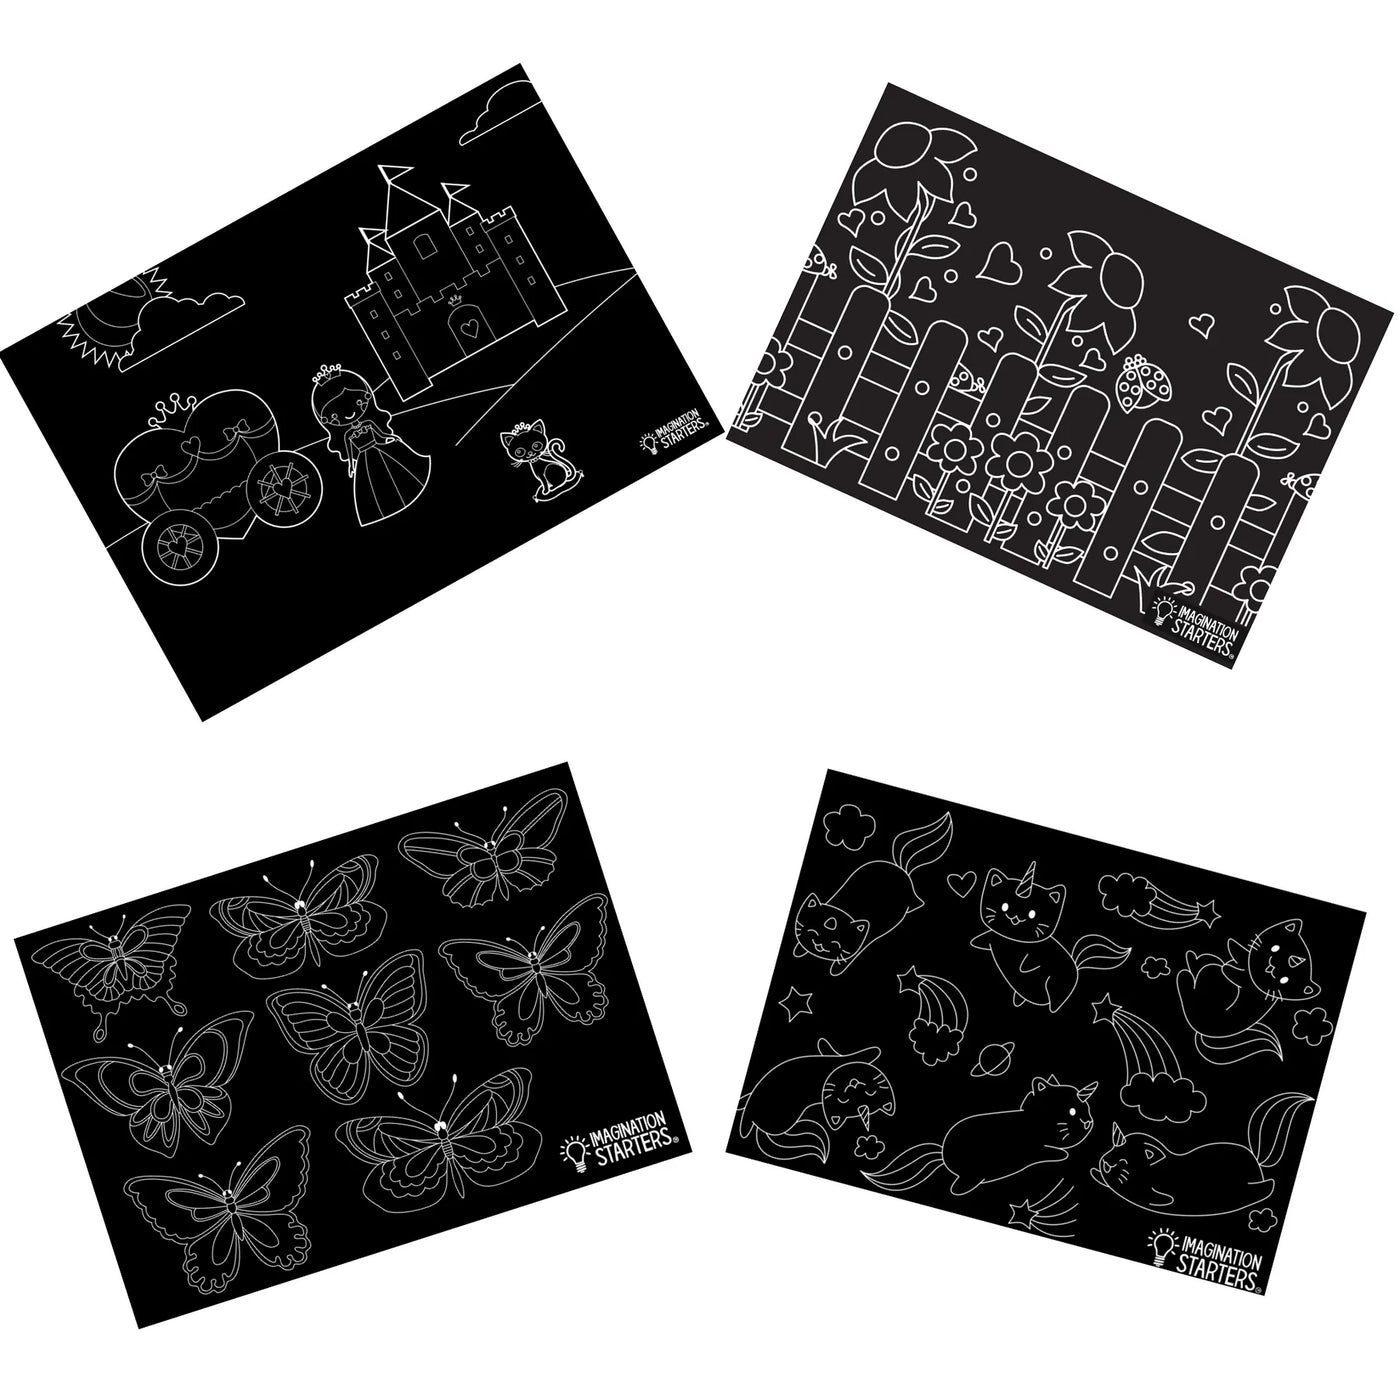 Whimsey 12"x17" Chalkboard Placemats- Set of 4